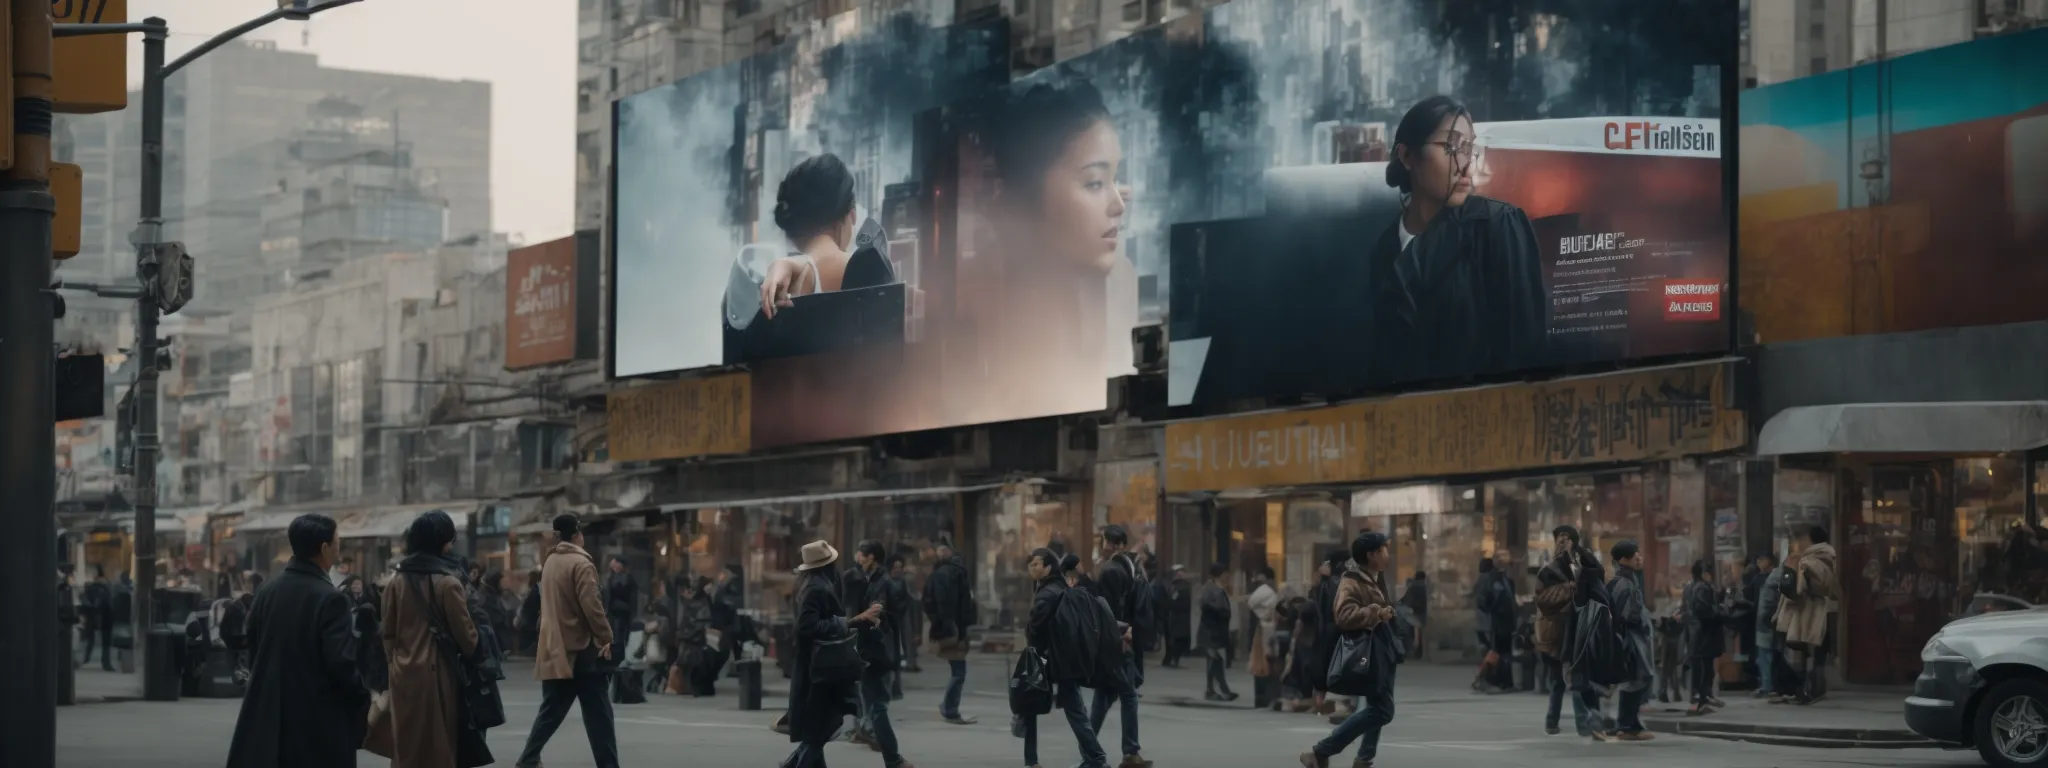 a bustling street corner billboard showcasing a striking advertisement, with pedestrians interacting with the same campaign on their smartphones.